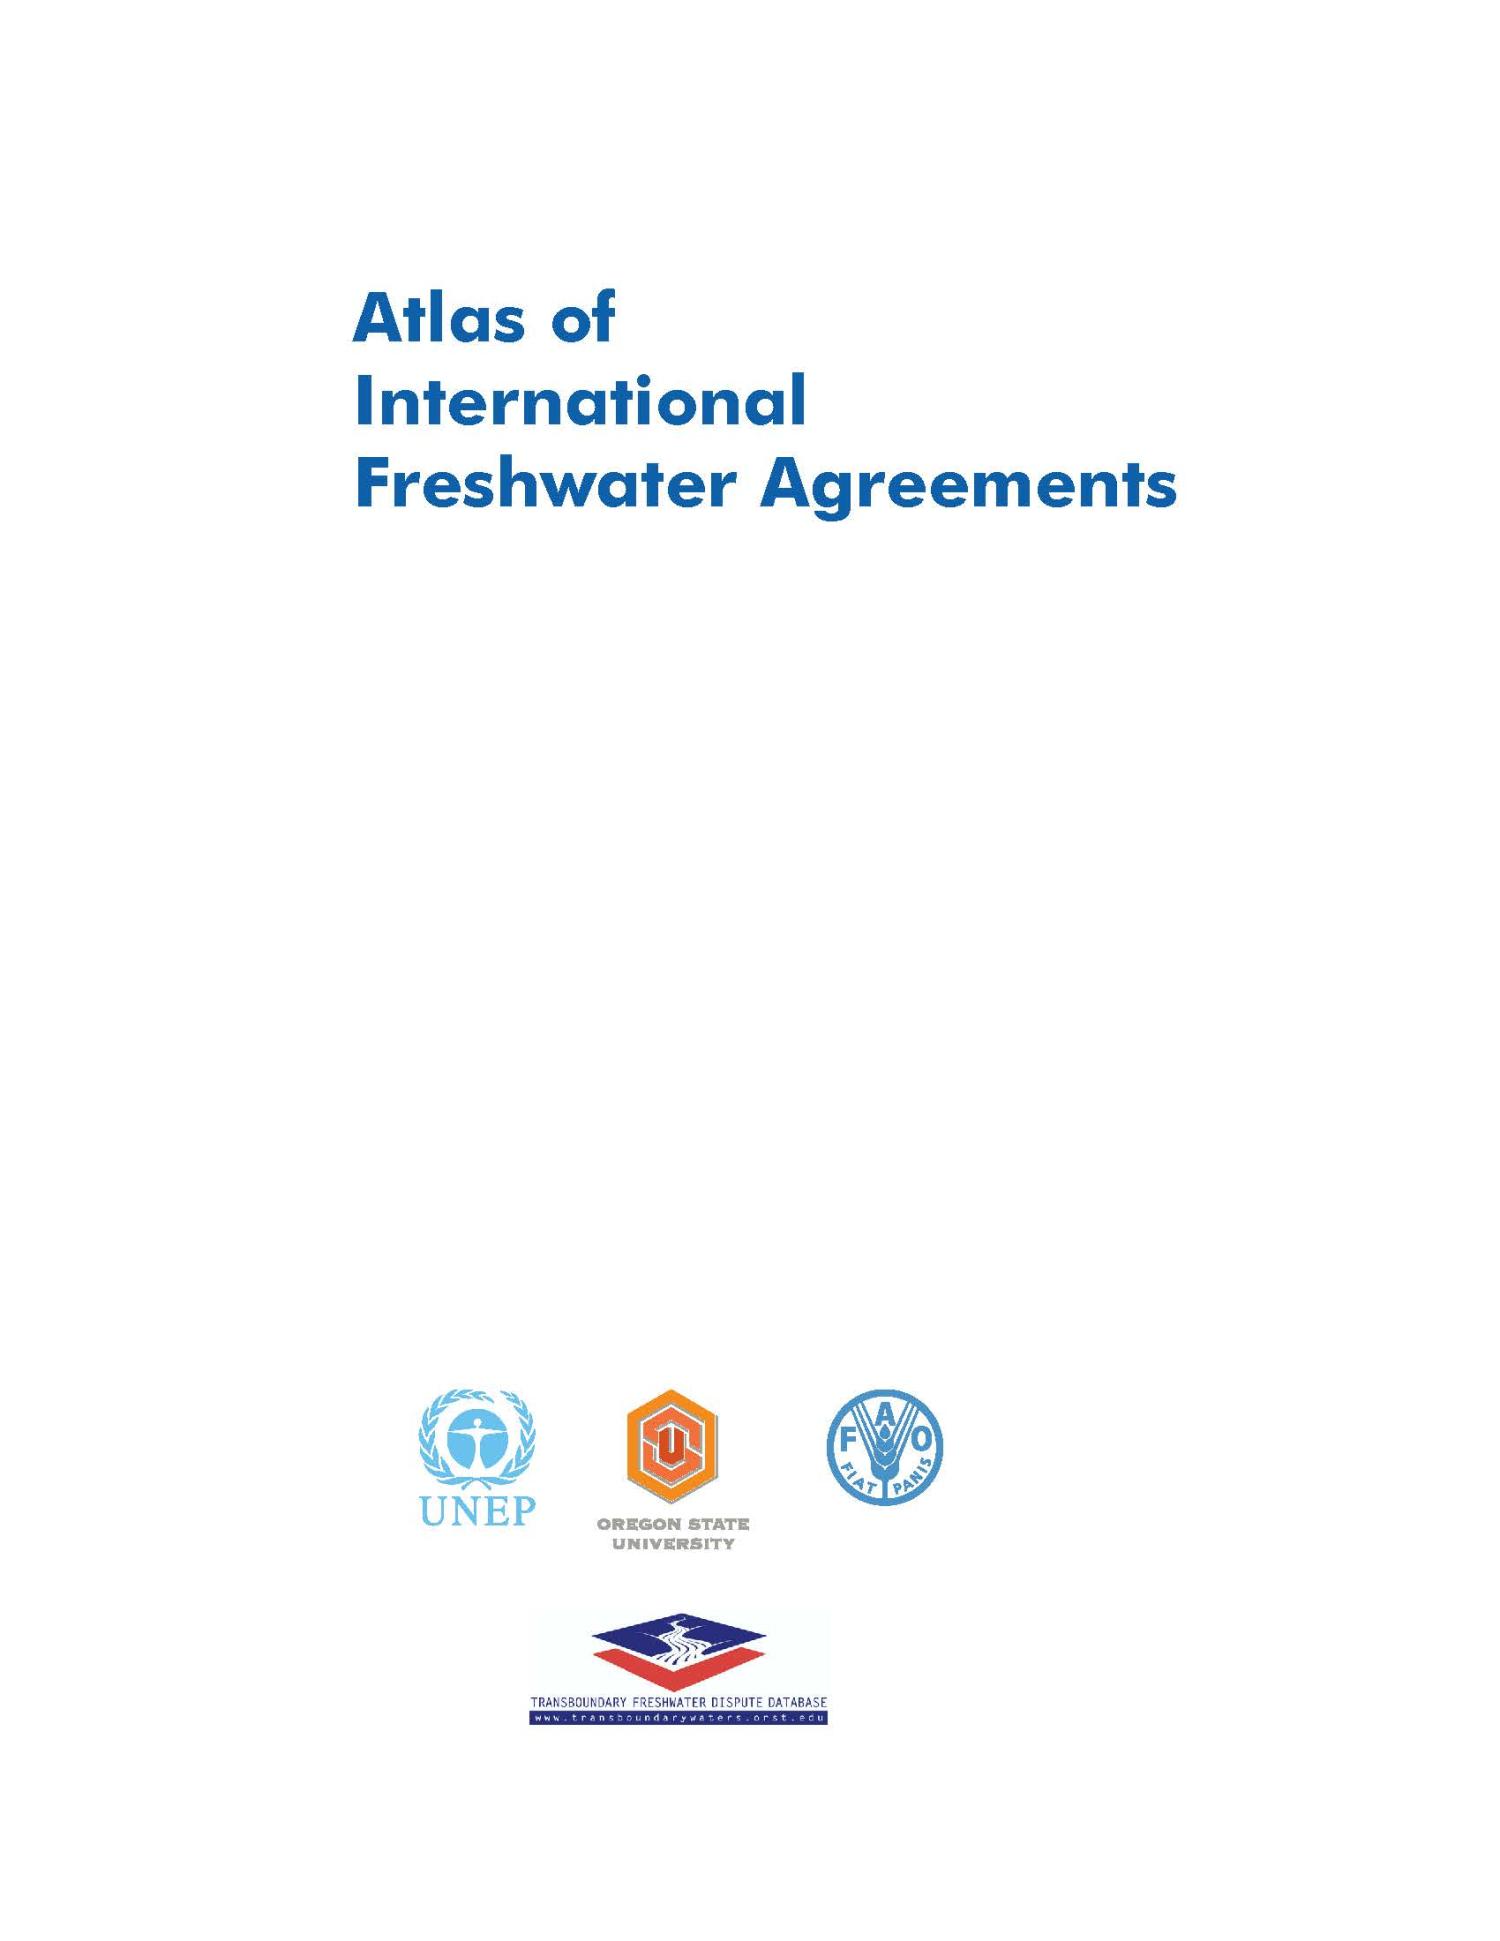 Atals of International Freshwater Agreements
                                                
                                                    Front Cover
                                                